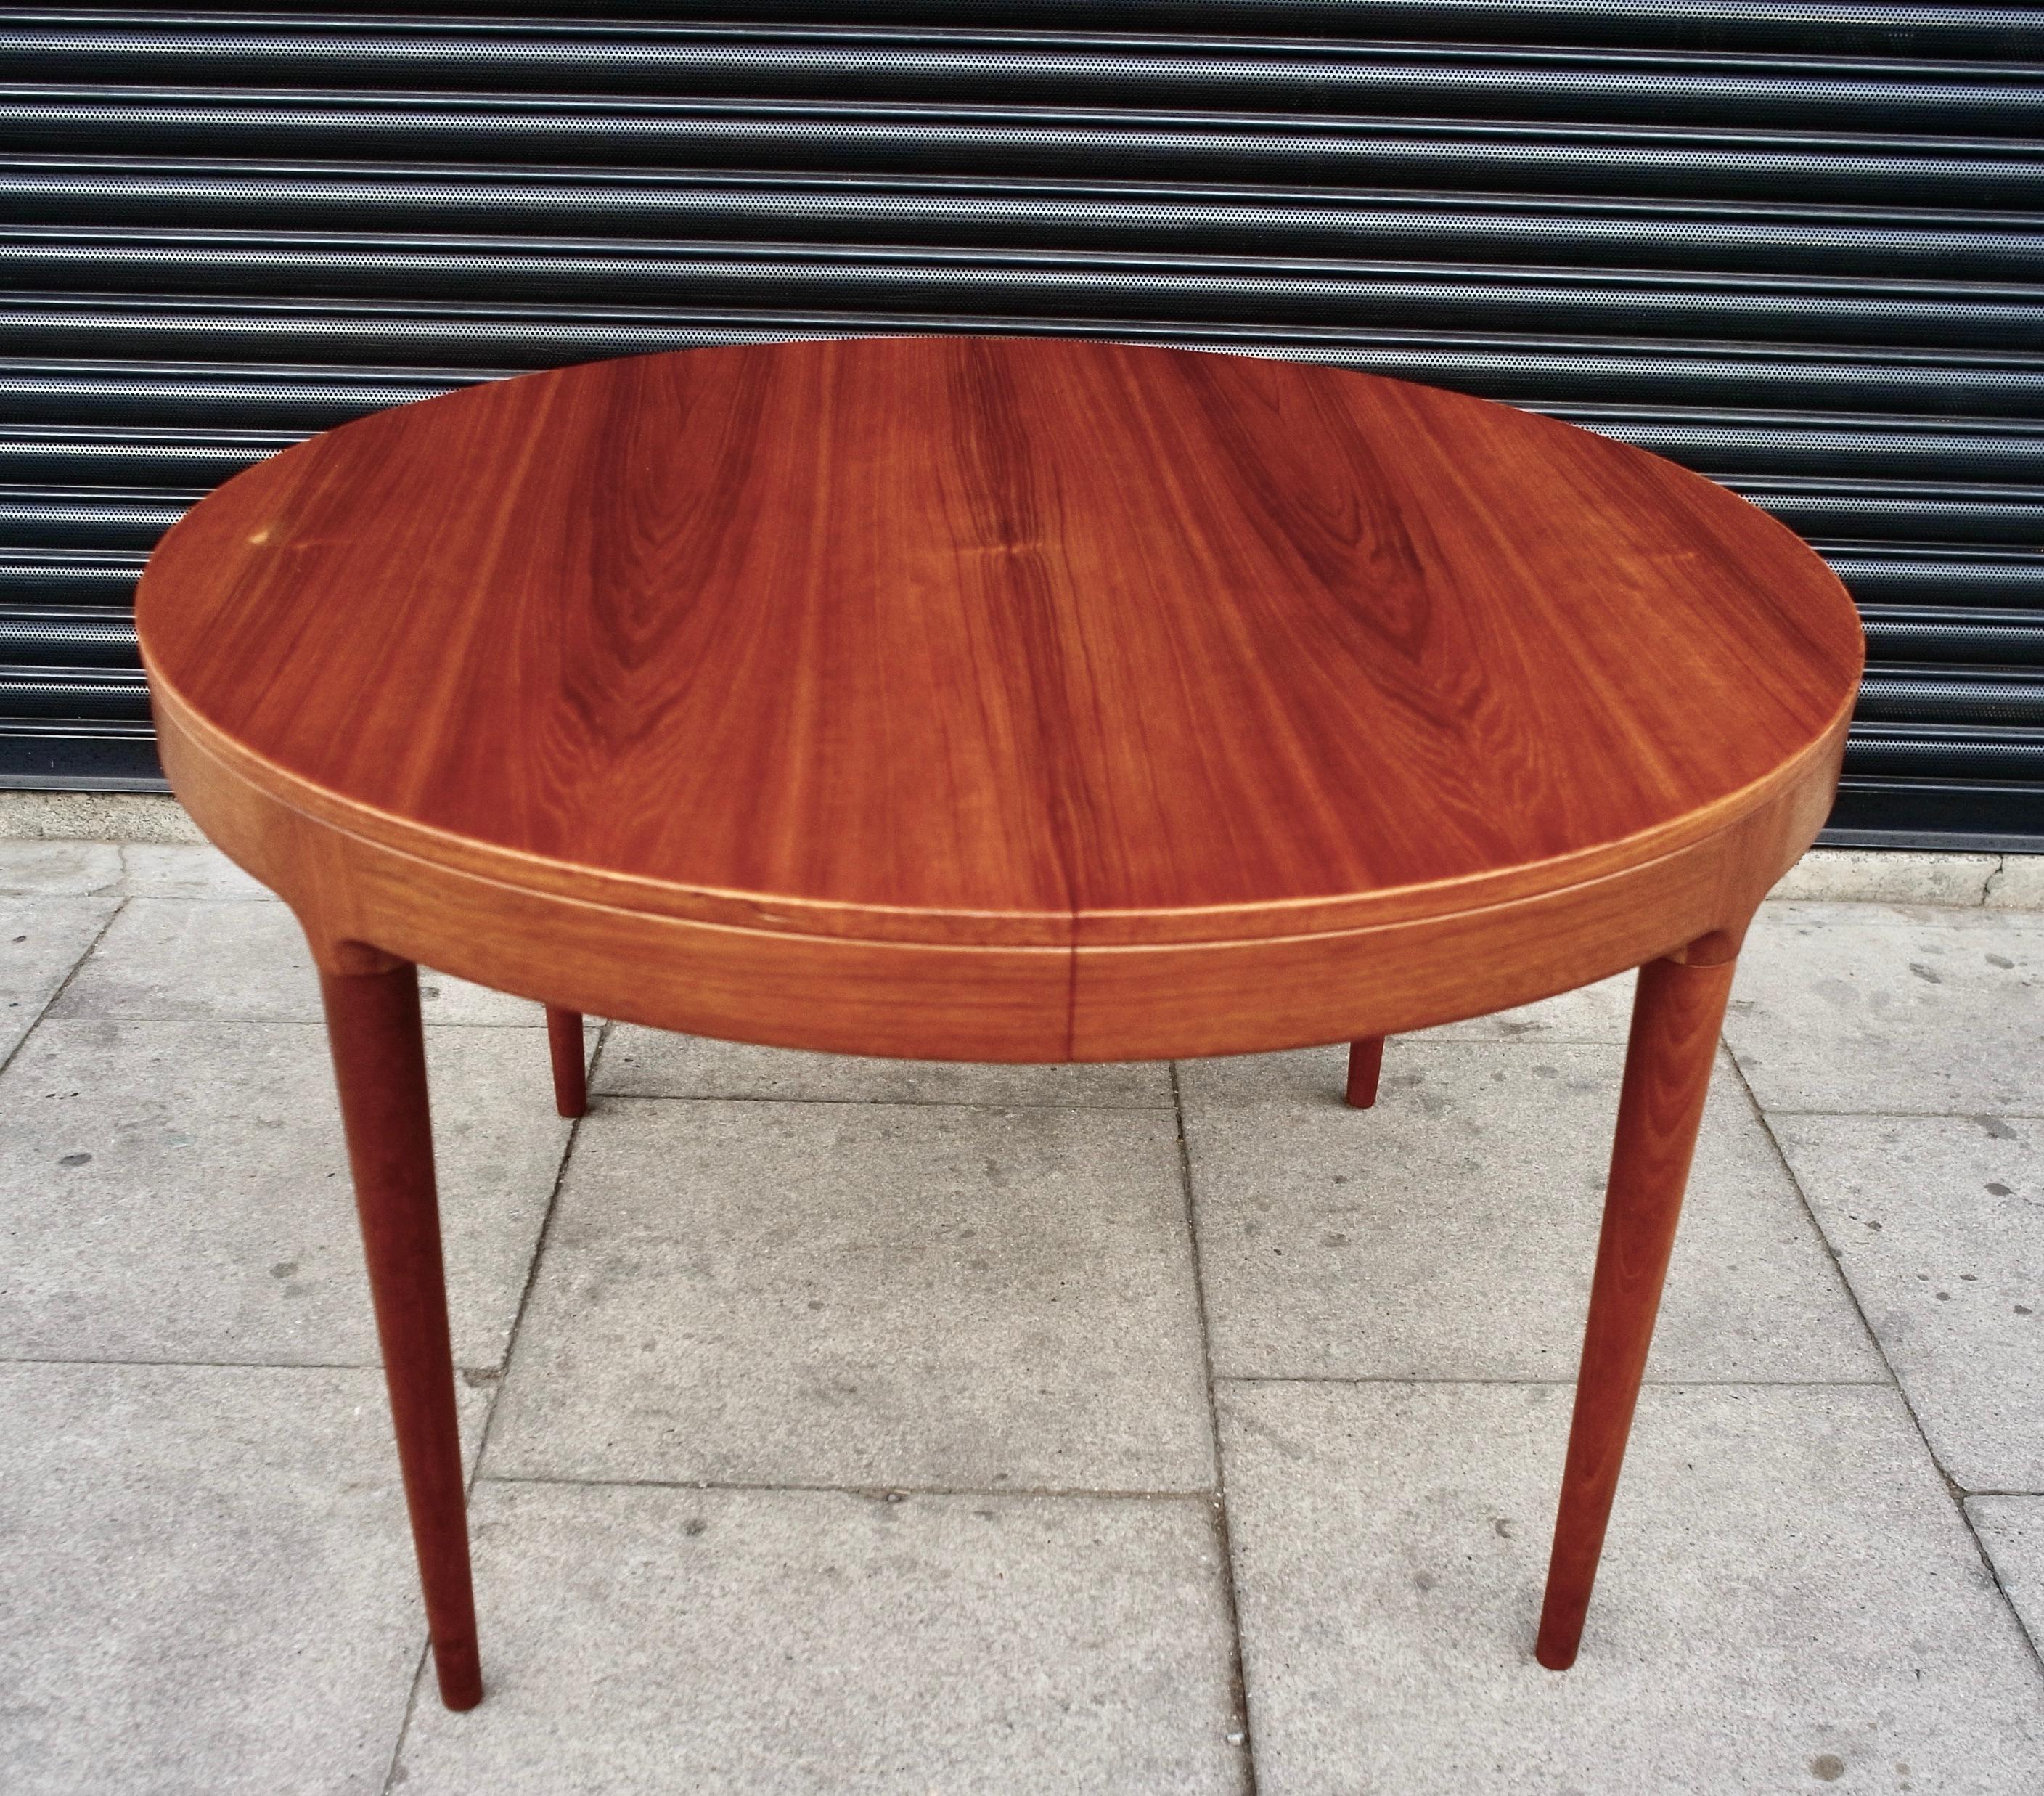 A vintage 1960s Danish round teak extendable dining table designed by Neils O Moller. This dining table has all the Classic characteristics of midcentury Danish design, with the simple lines and attention to detail, accompanied with the quality of